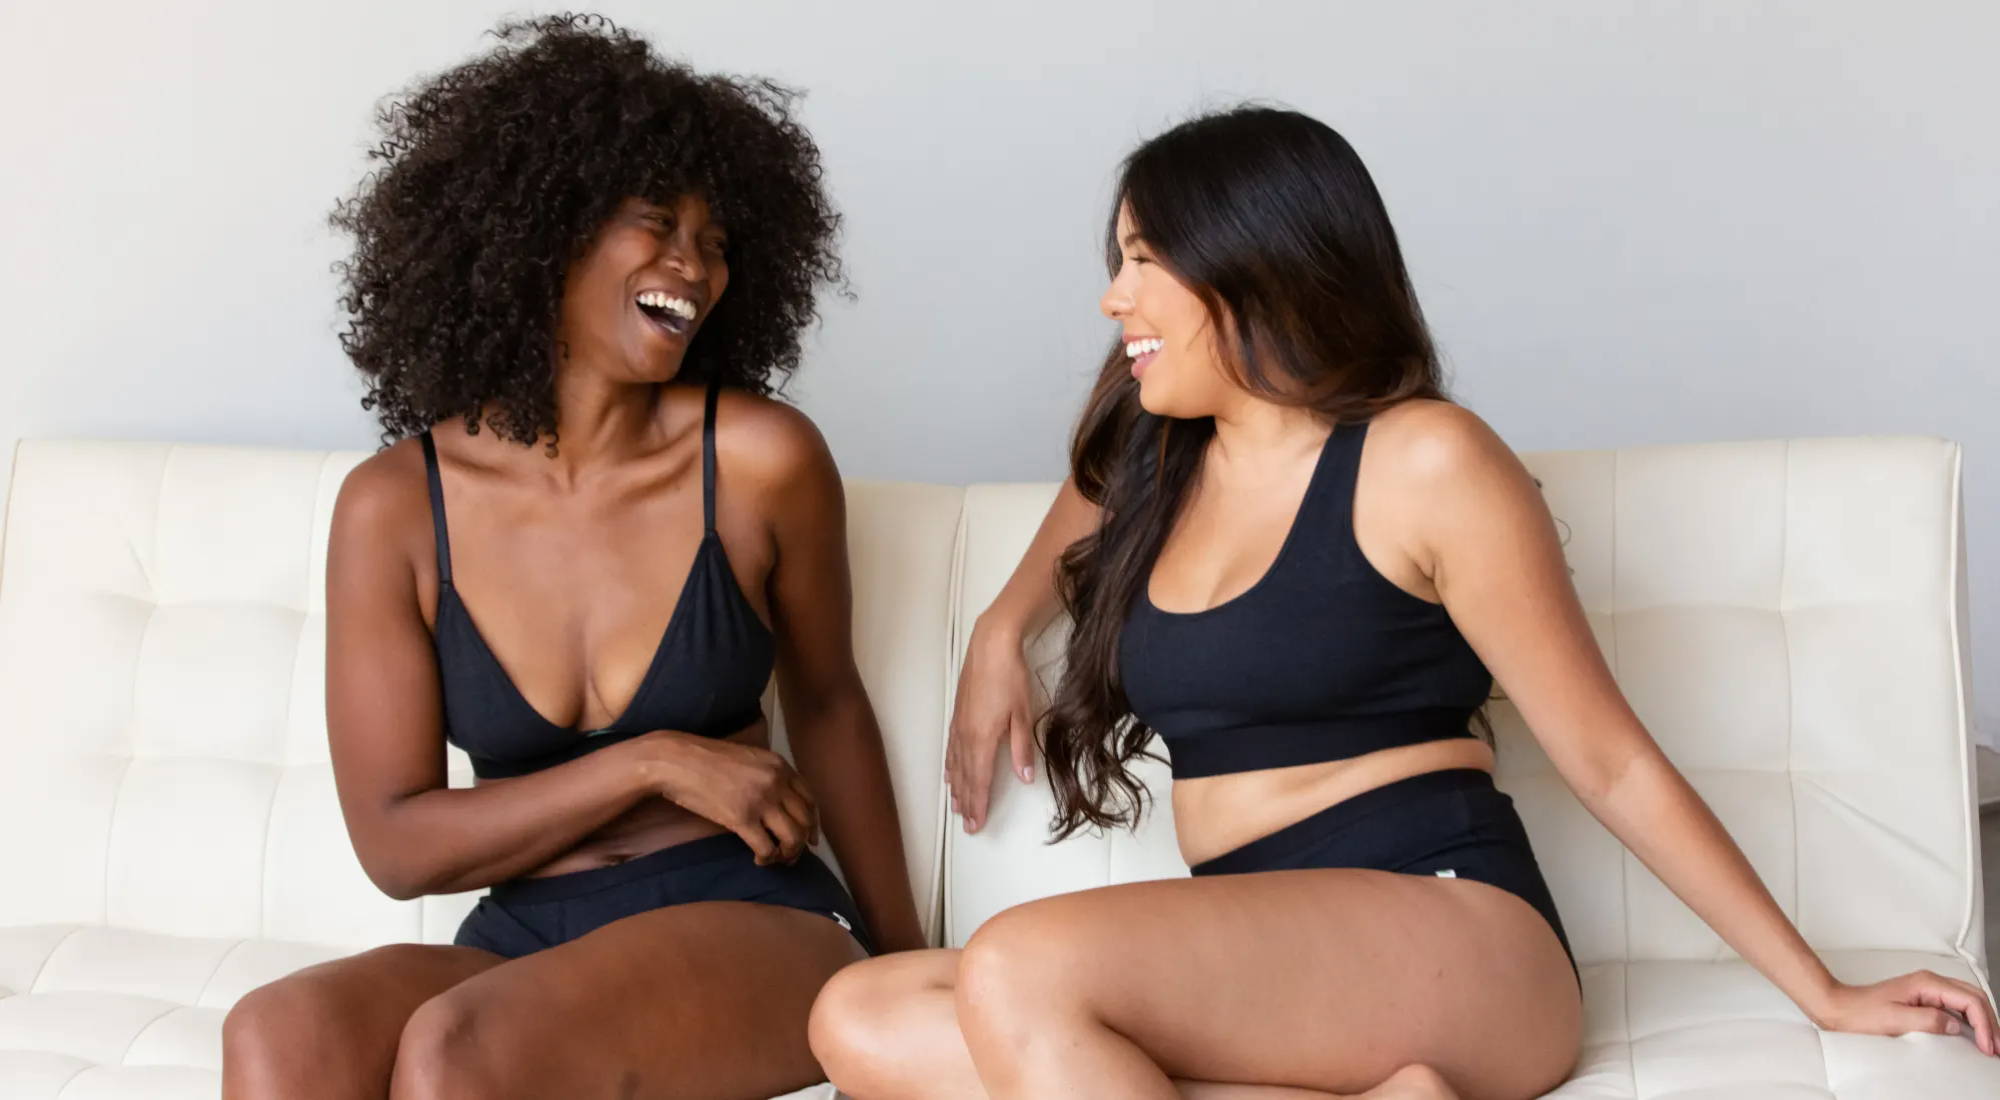 Two women in WAMA hemp bralettes and organic underwear sit on a white couch, laughing.